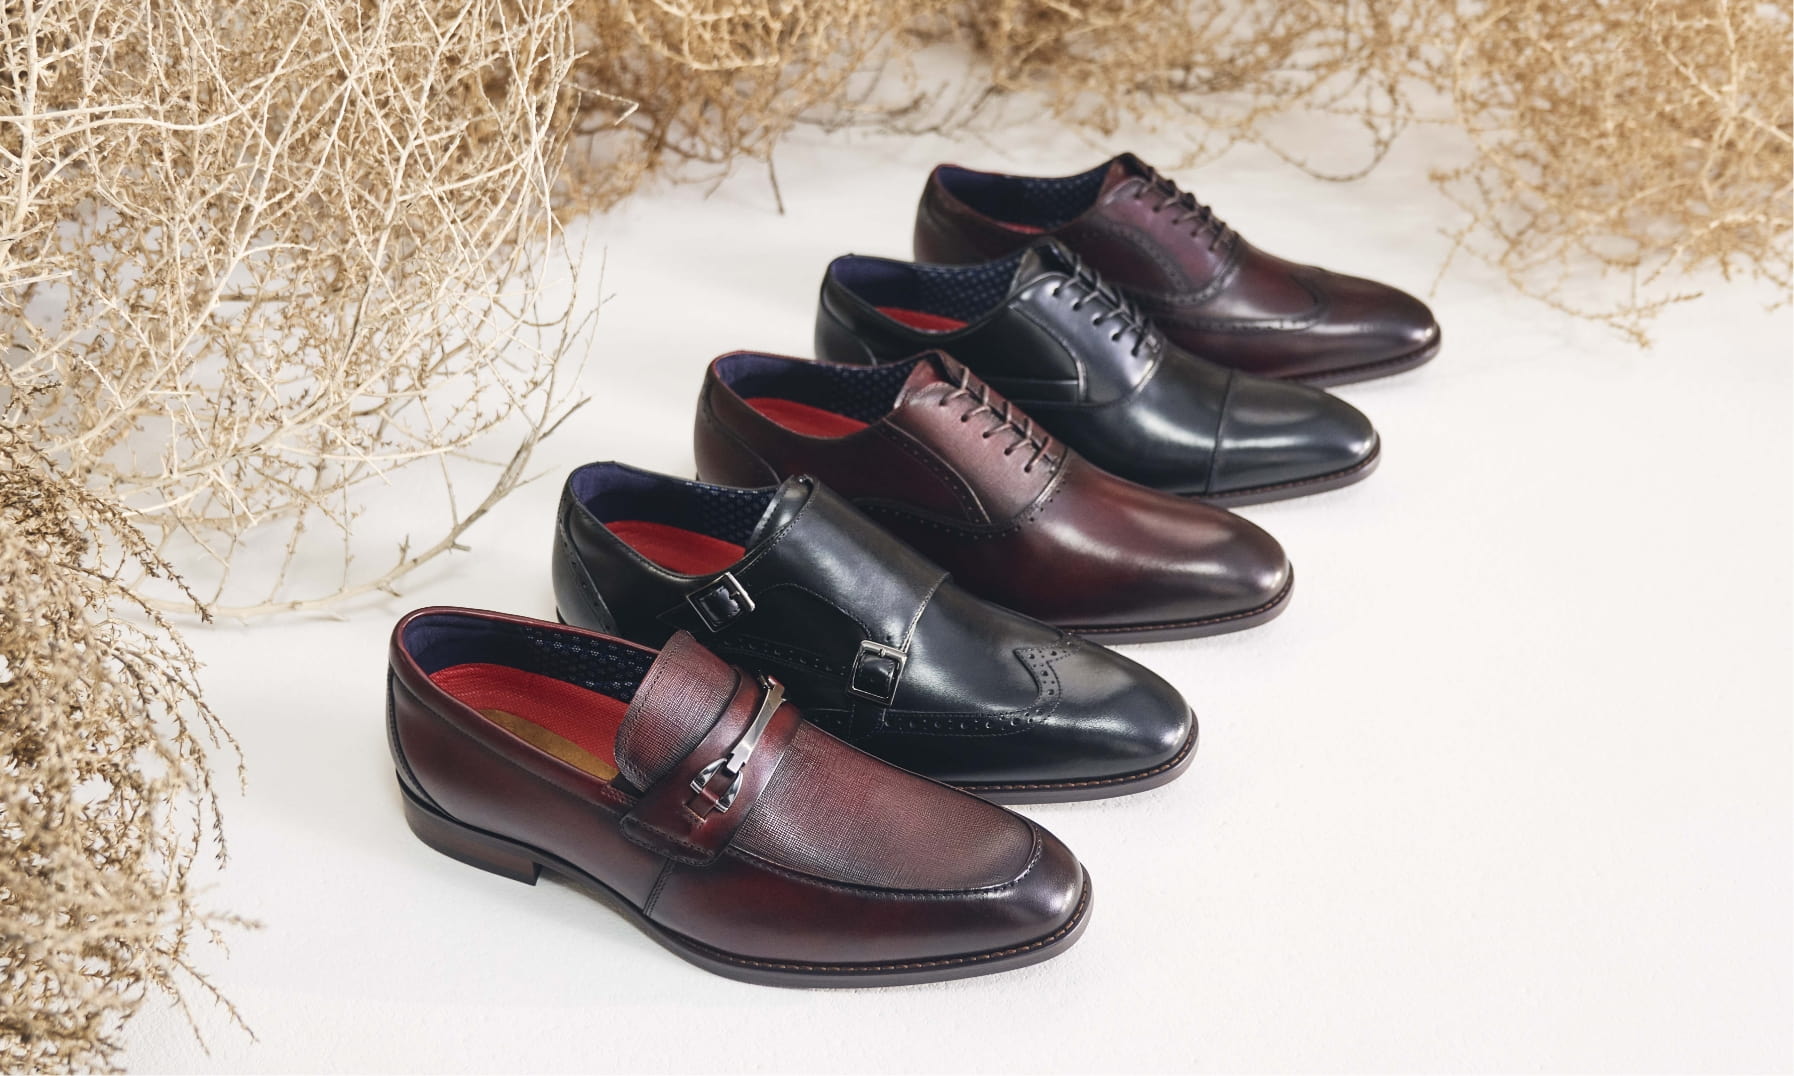 Click to shop Stacy Adams dress shoes. Image features the K-series.